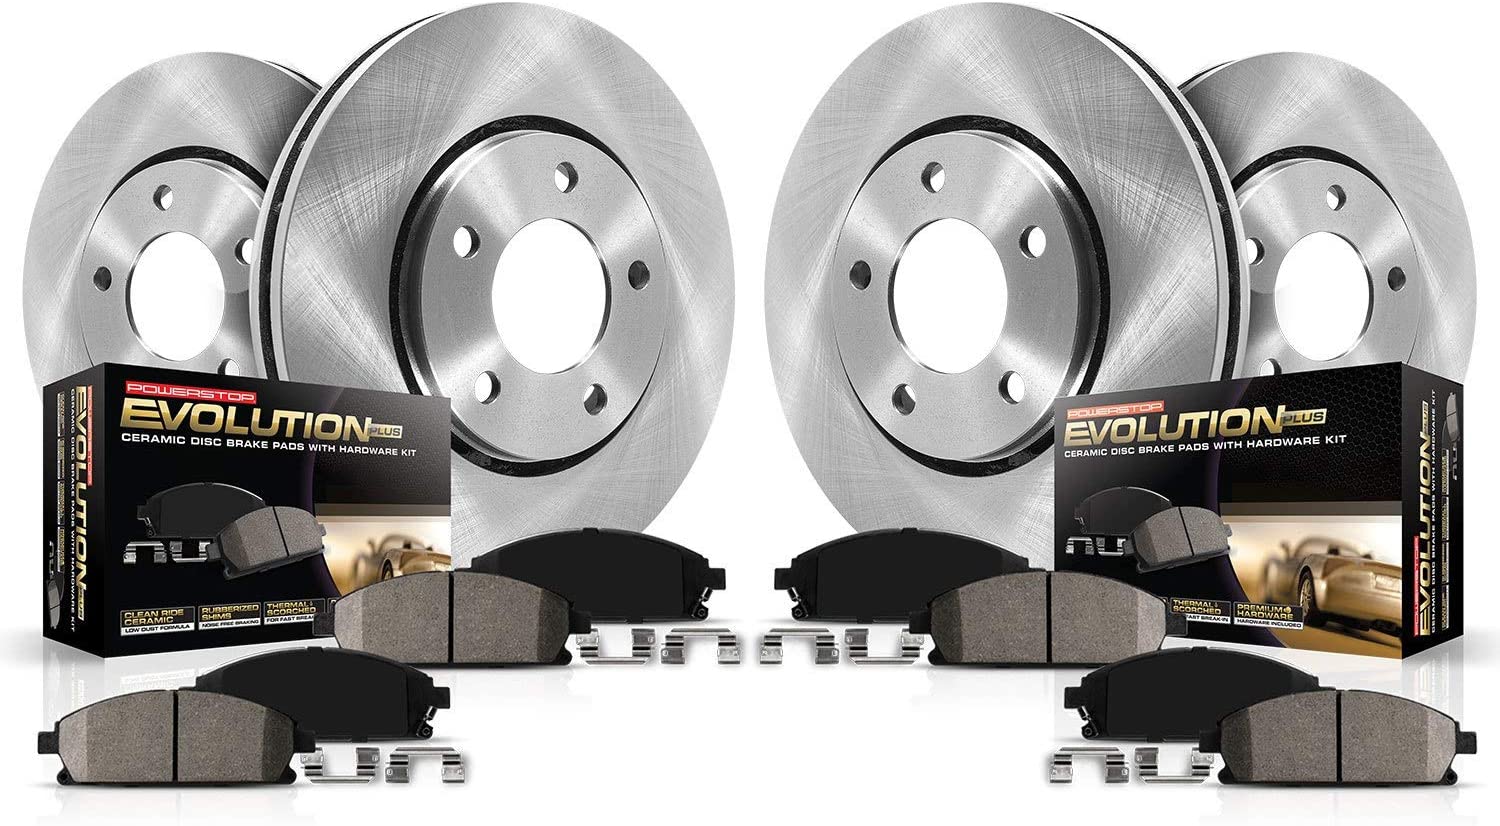 Autospecialty (KOE5516) Daily Driver OE Brake Kit, Front and Rear